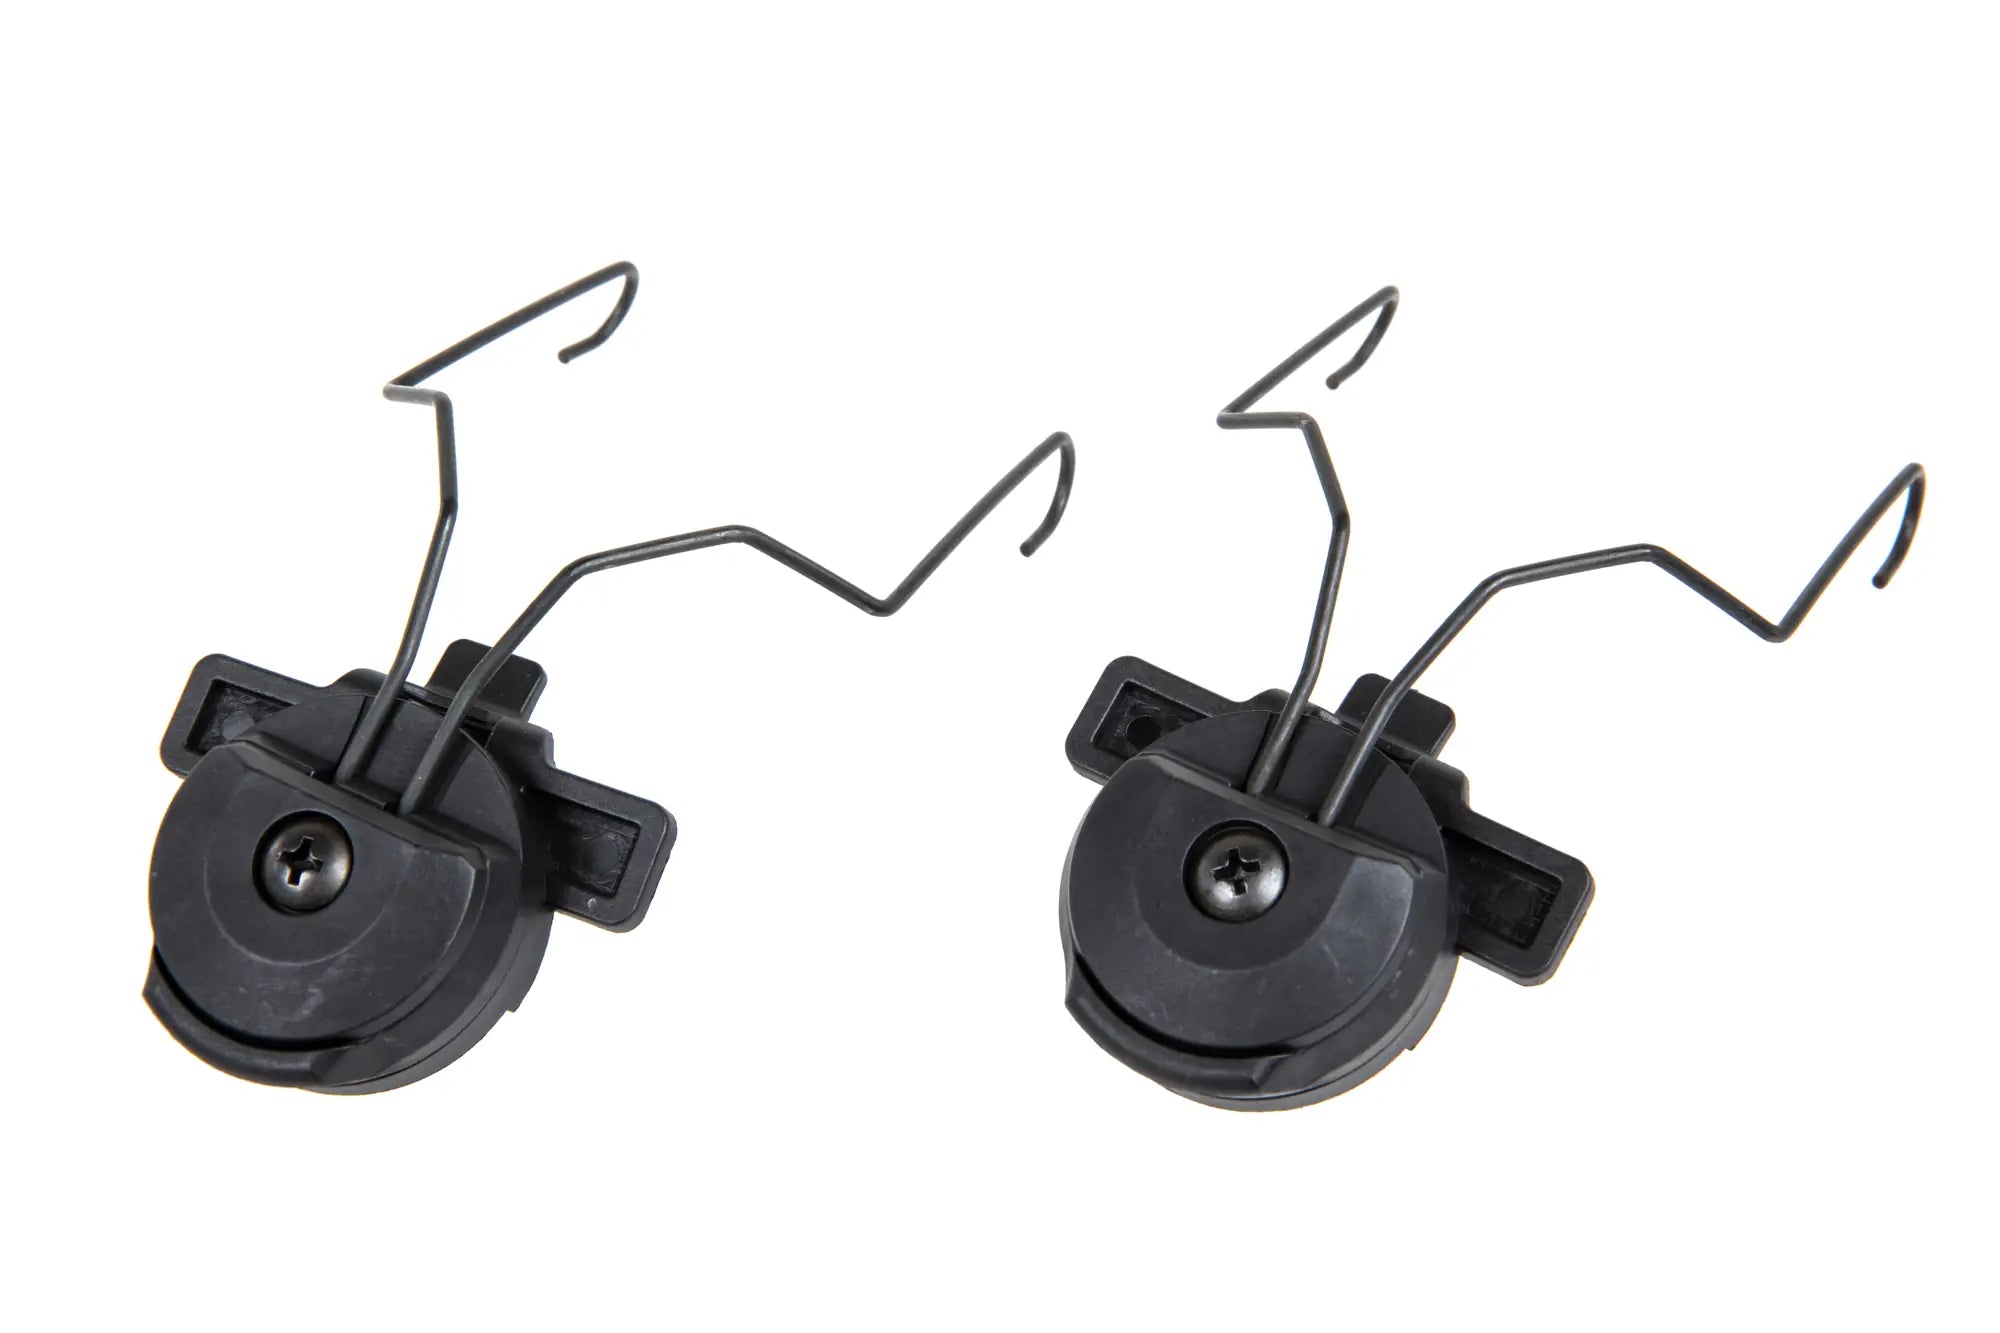 FMA Gen 2 EX 3.0 TW mounting kit for hearing protection Sordin Black